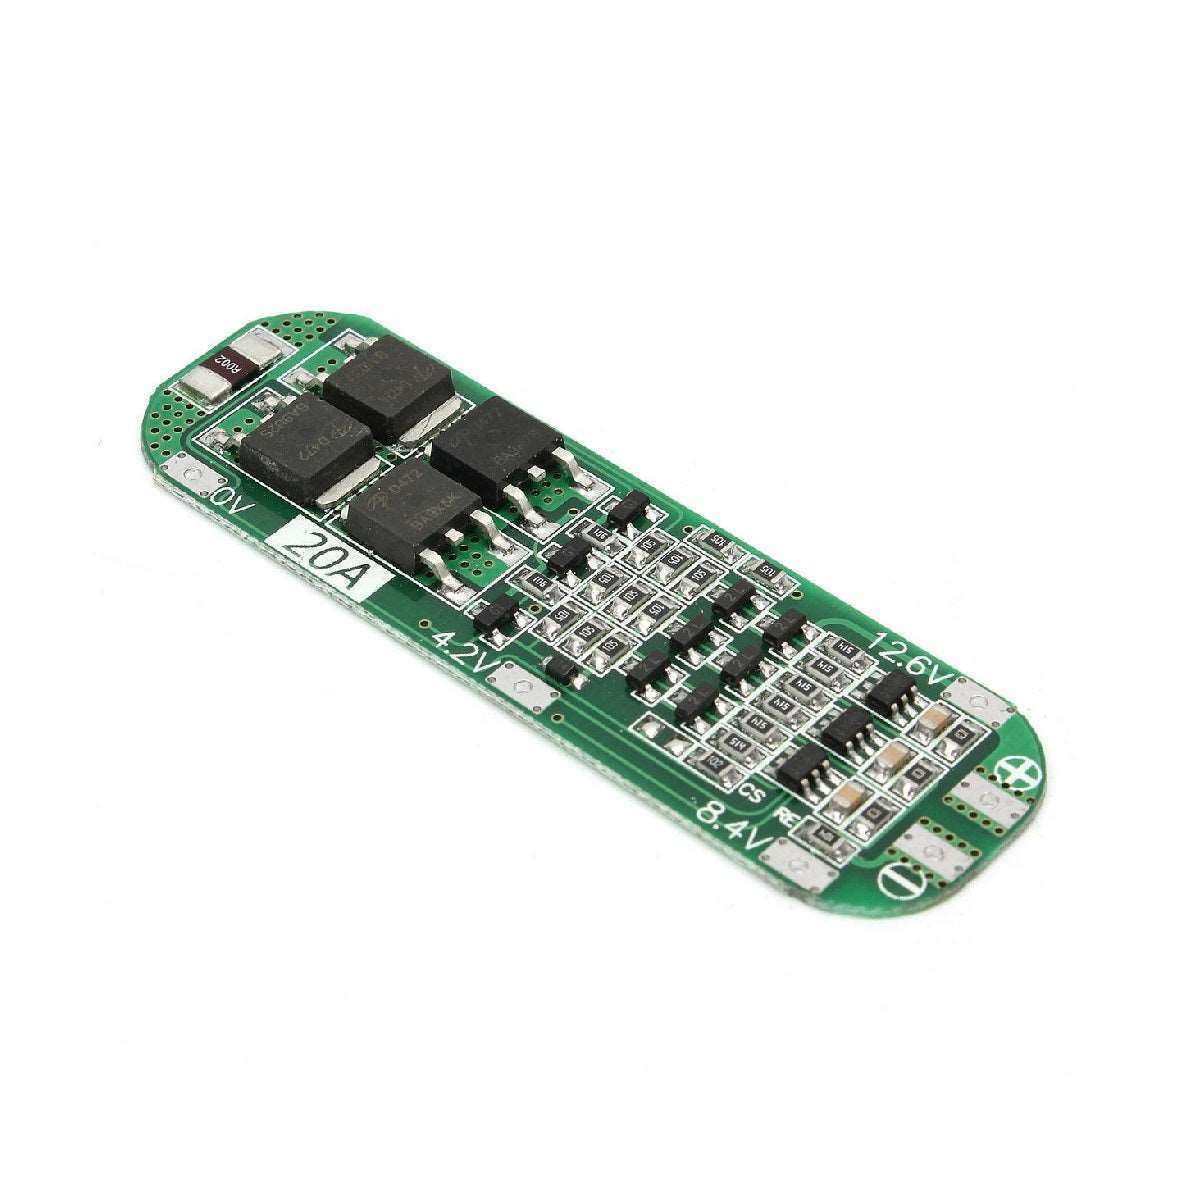 3 Series 20A 18650 Lithium Battery Protection Board